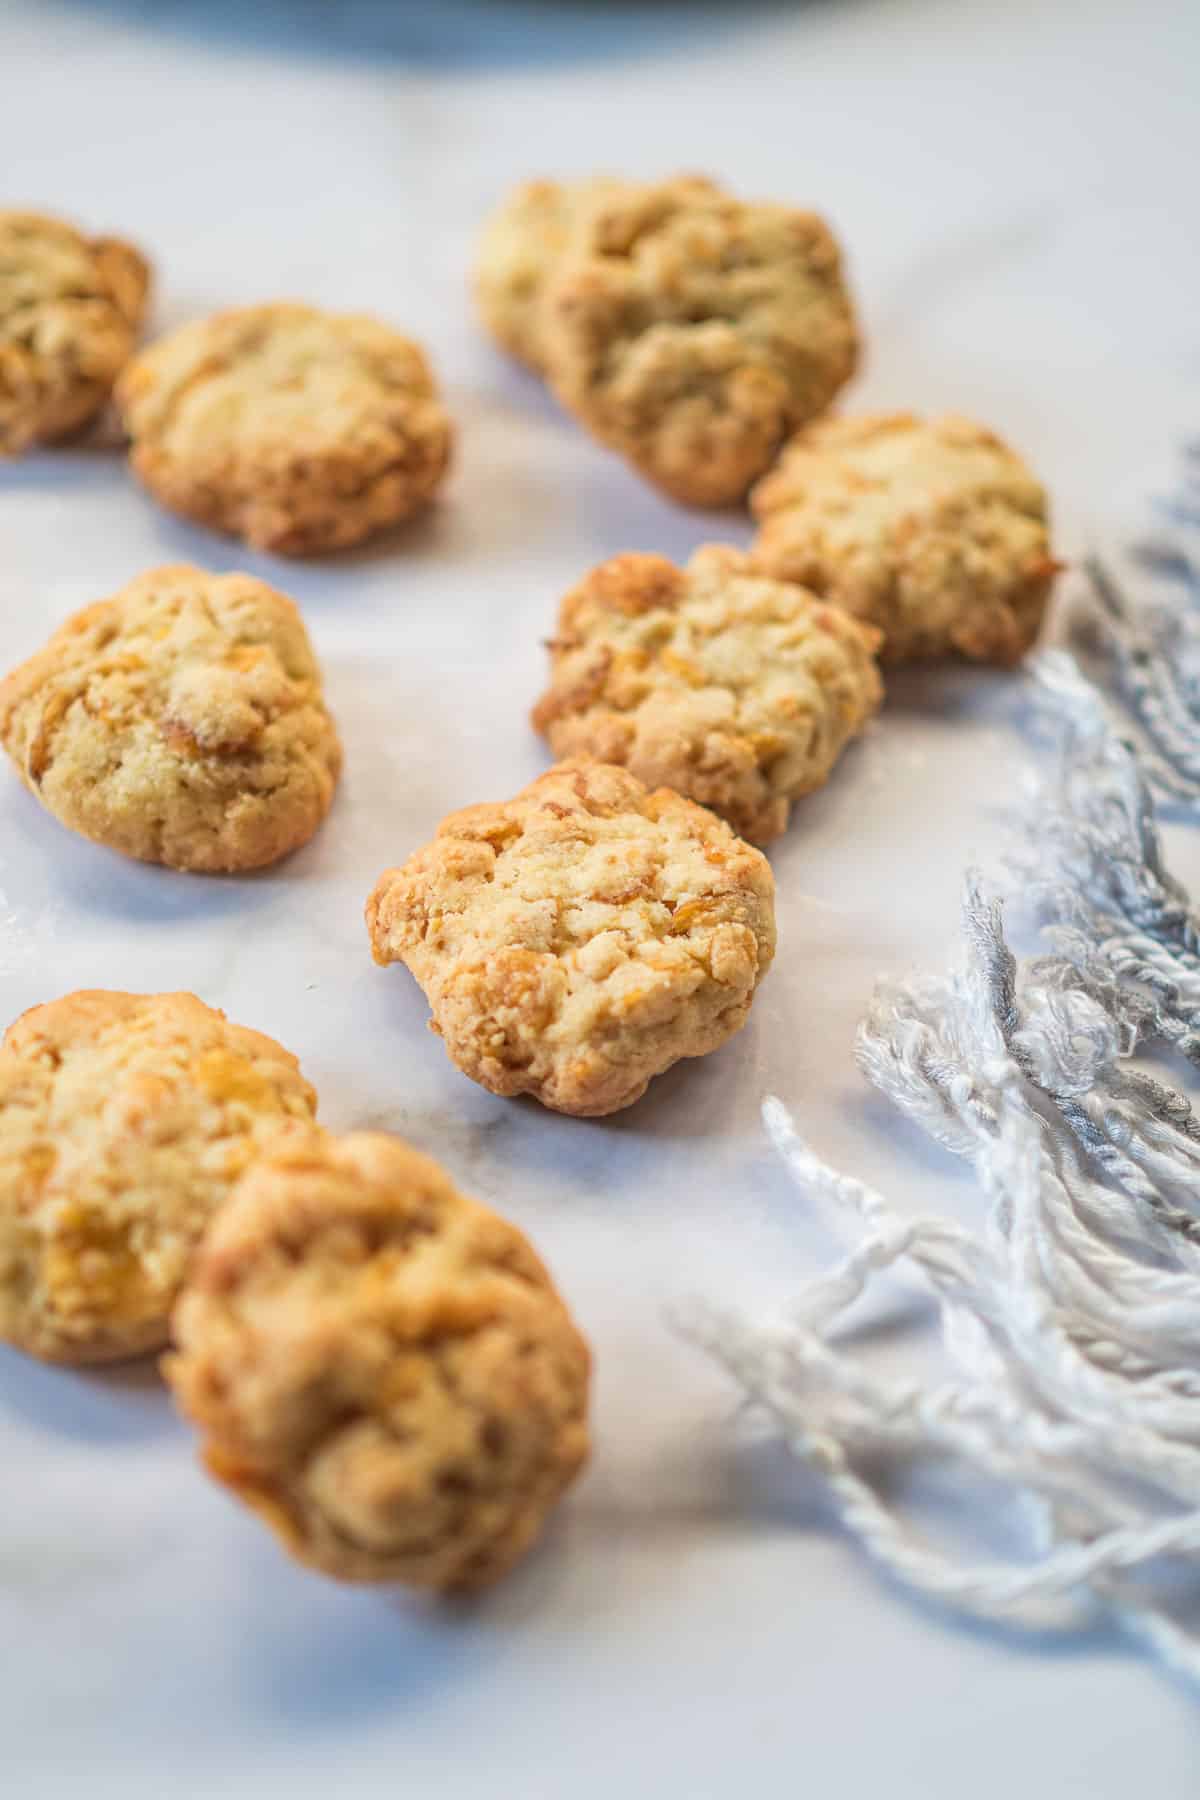 Cookies against a marble background.